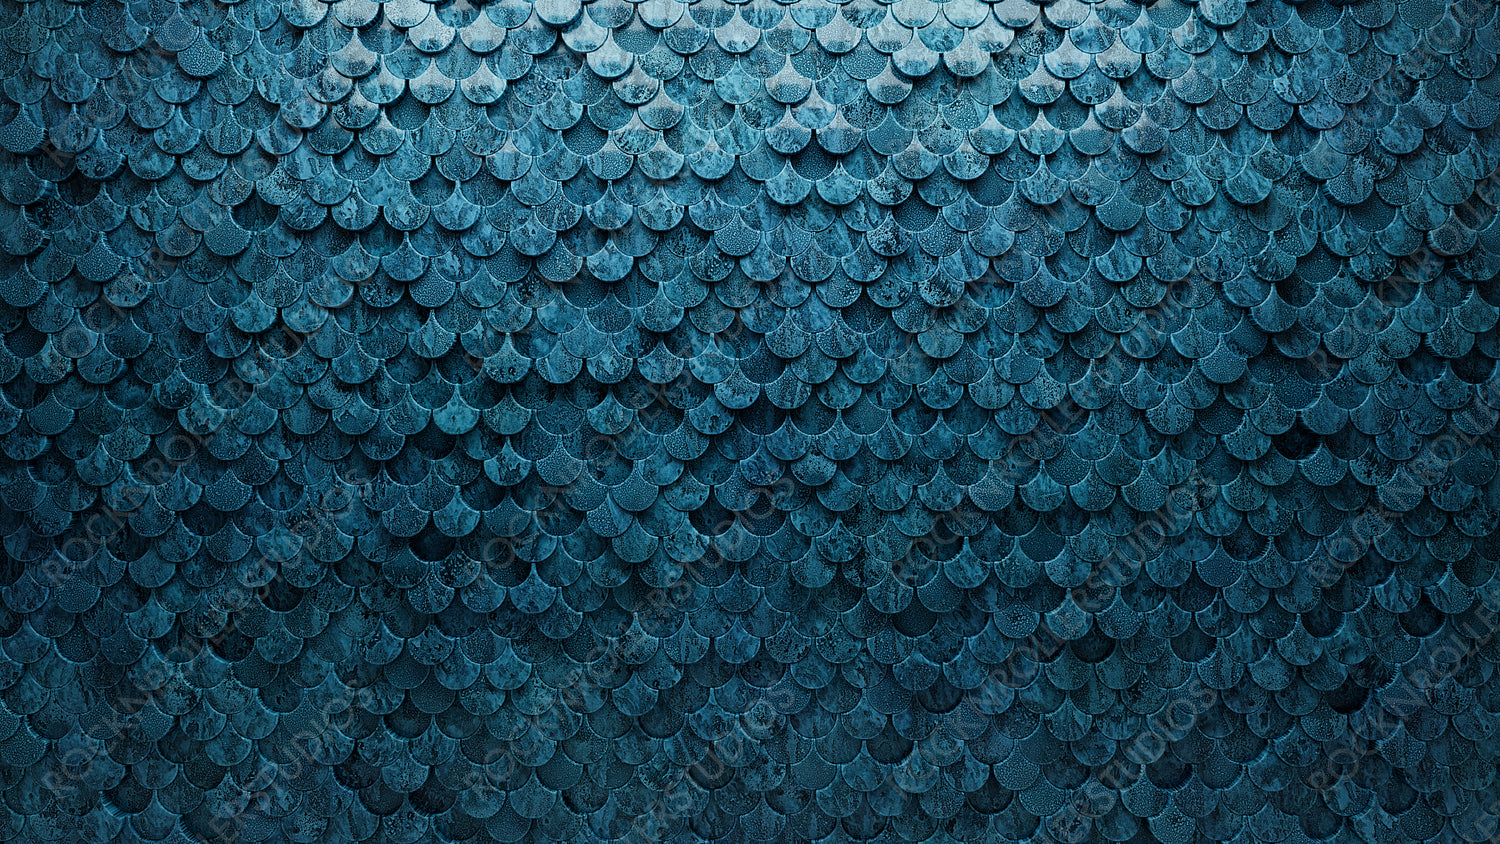 3D Tiles arranged to create a Glazed wall. Textured, Fish Scale Background formed from Blue Patina blocks. 3D Render